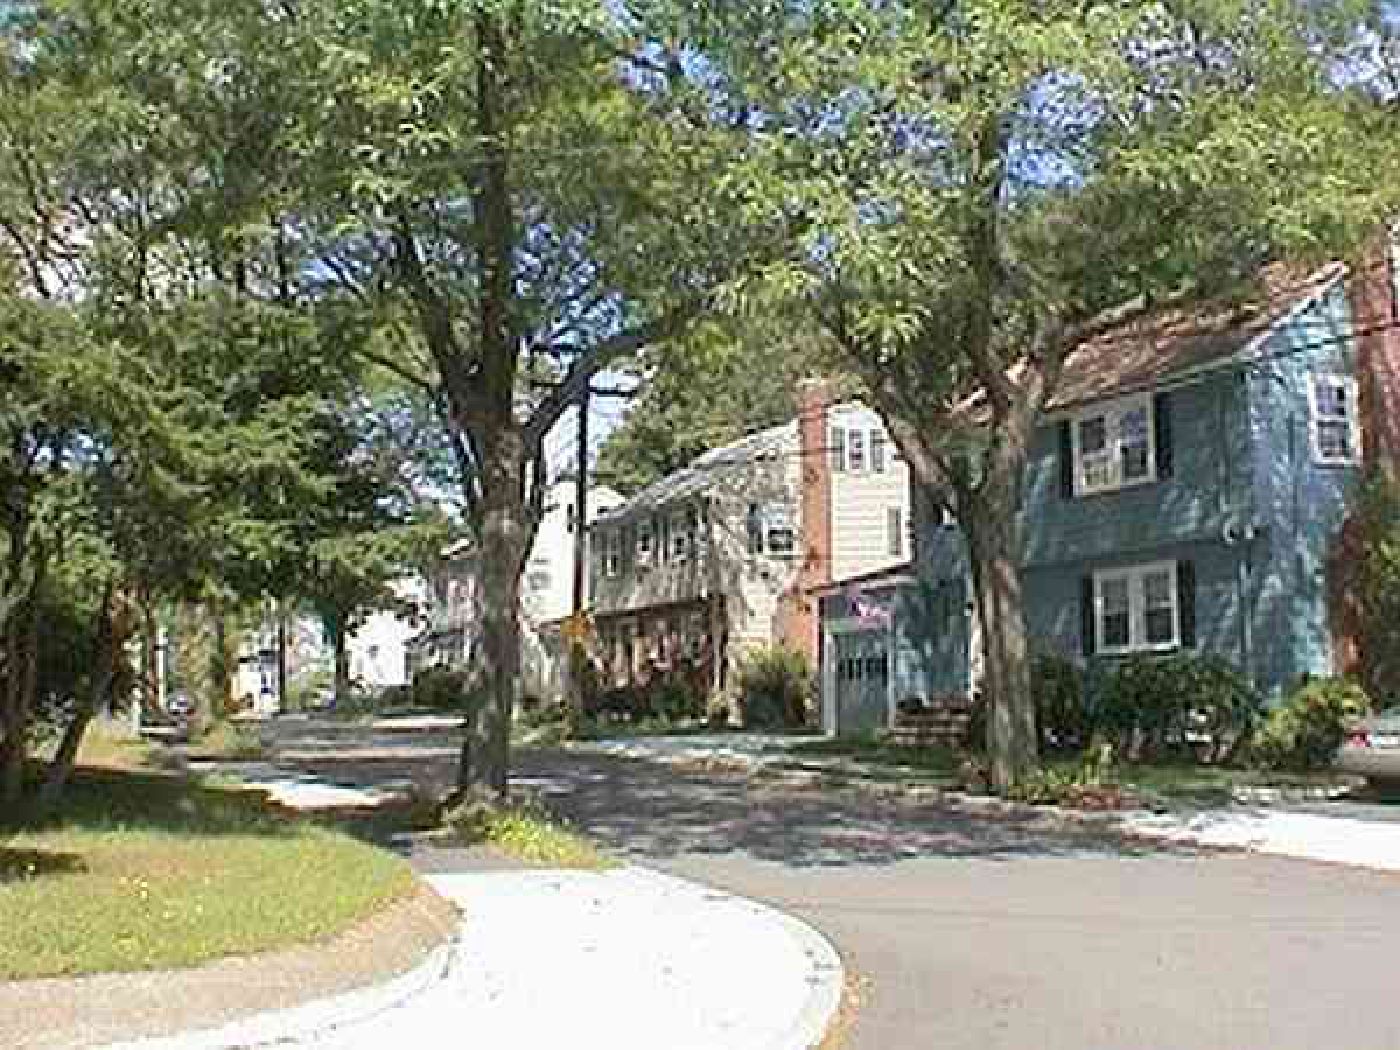 Colonial homes on Range Road in Dorchester, Boston